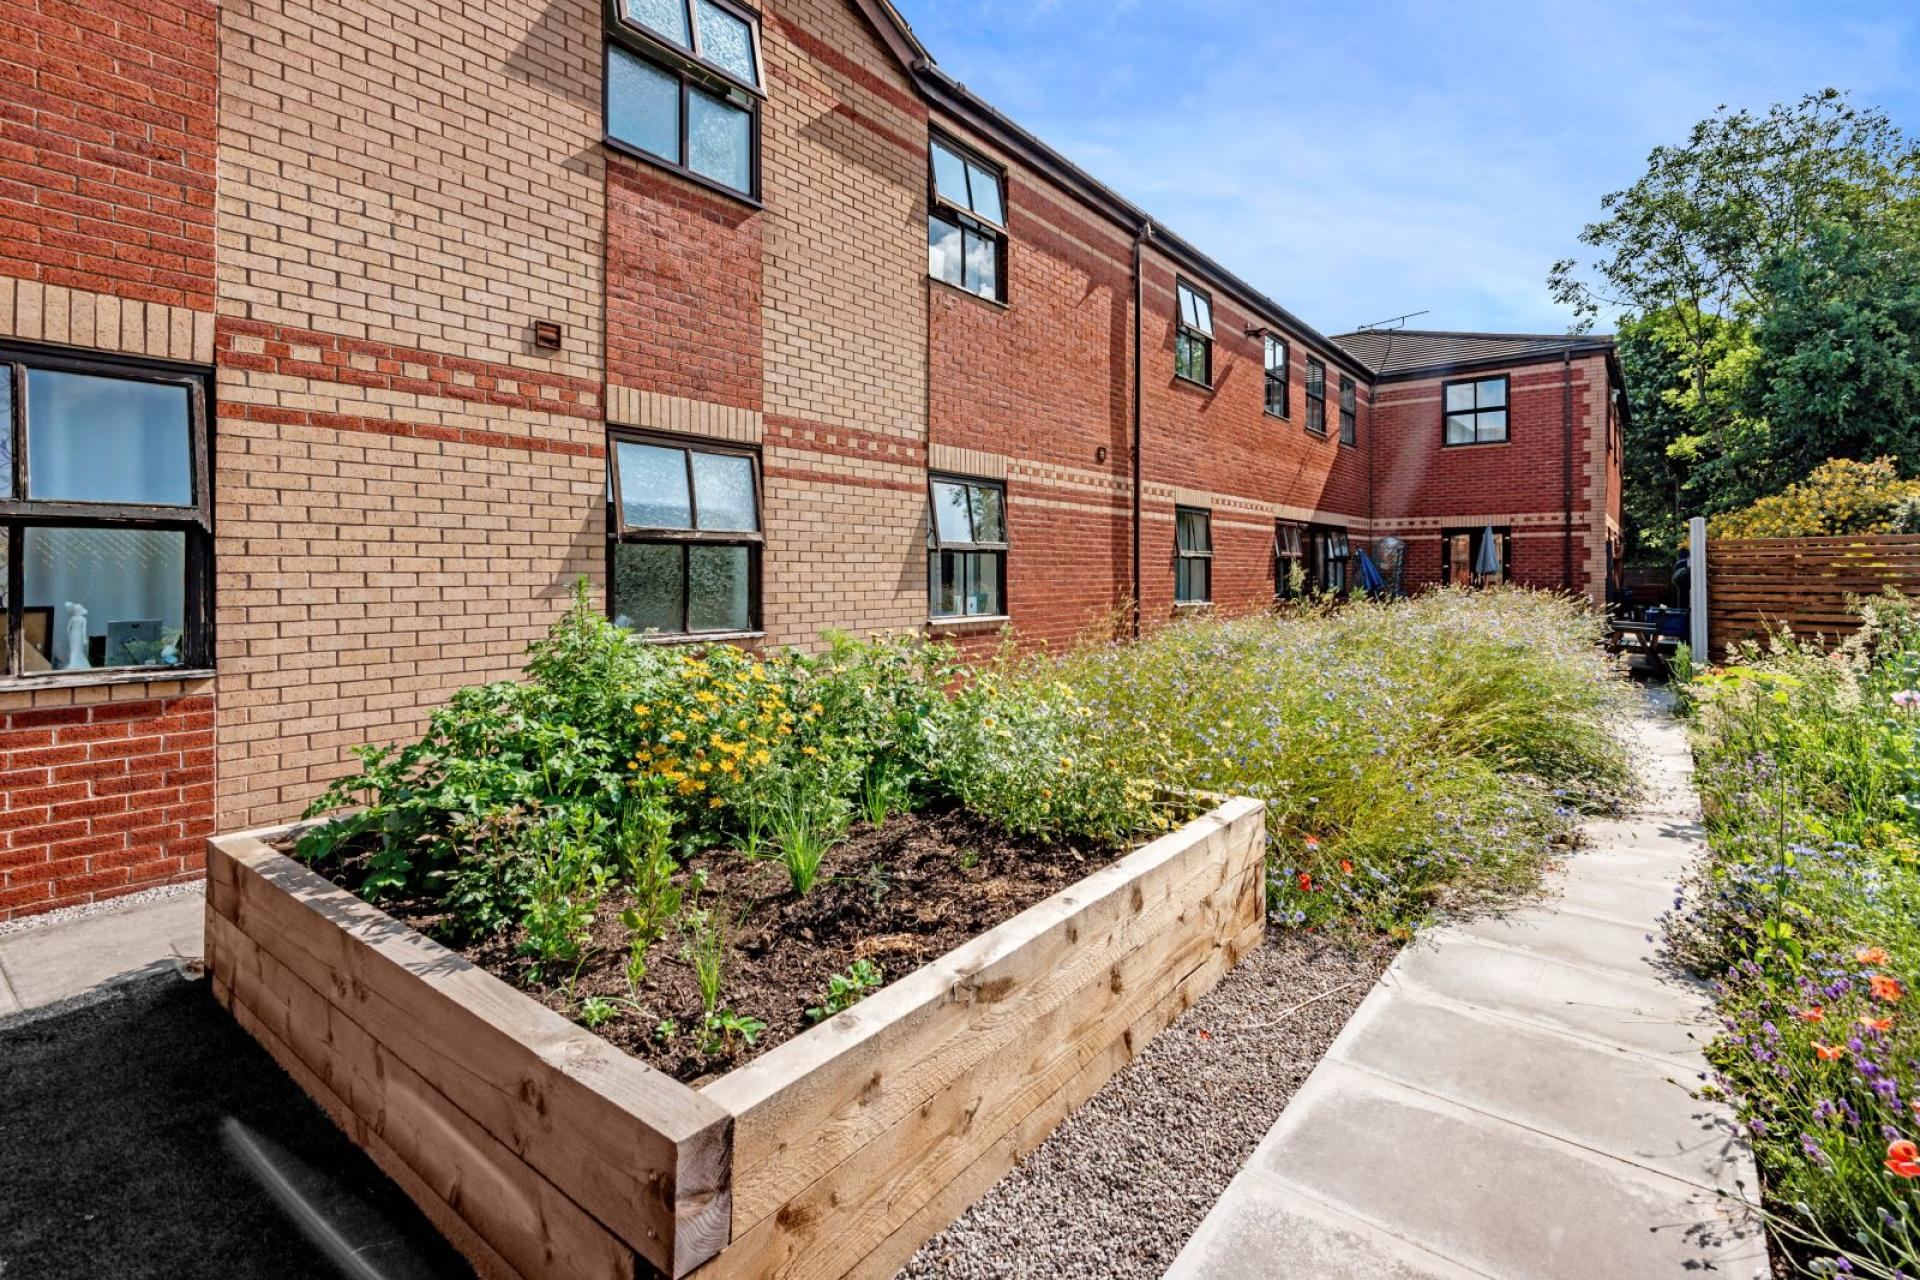 Paisley Lodge Dementia Care Home in Leeds